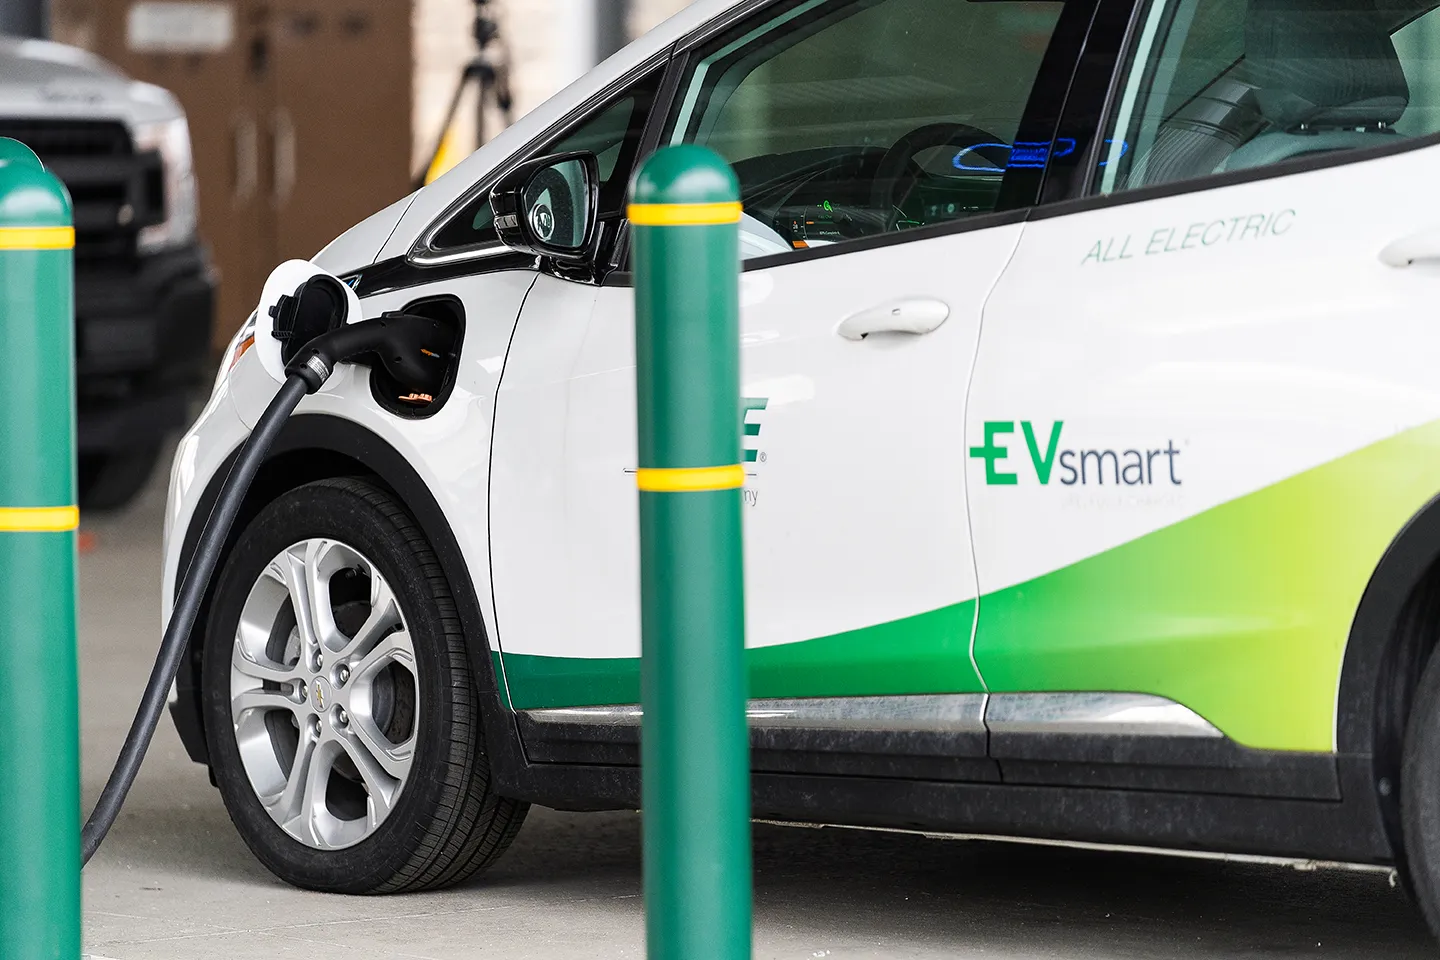 49 electric vehicle charging stations can be powered by renewable and low-cost solar generation.